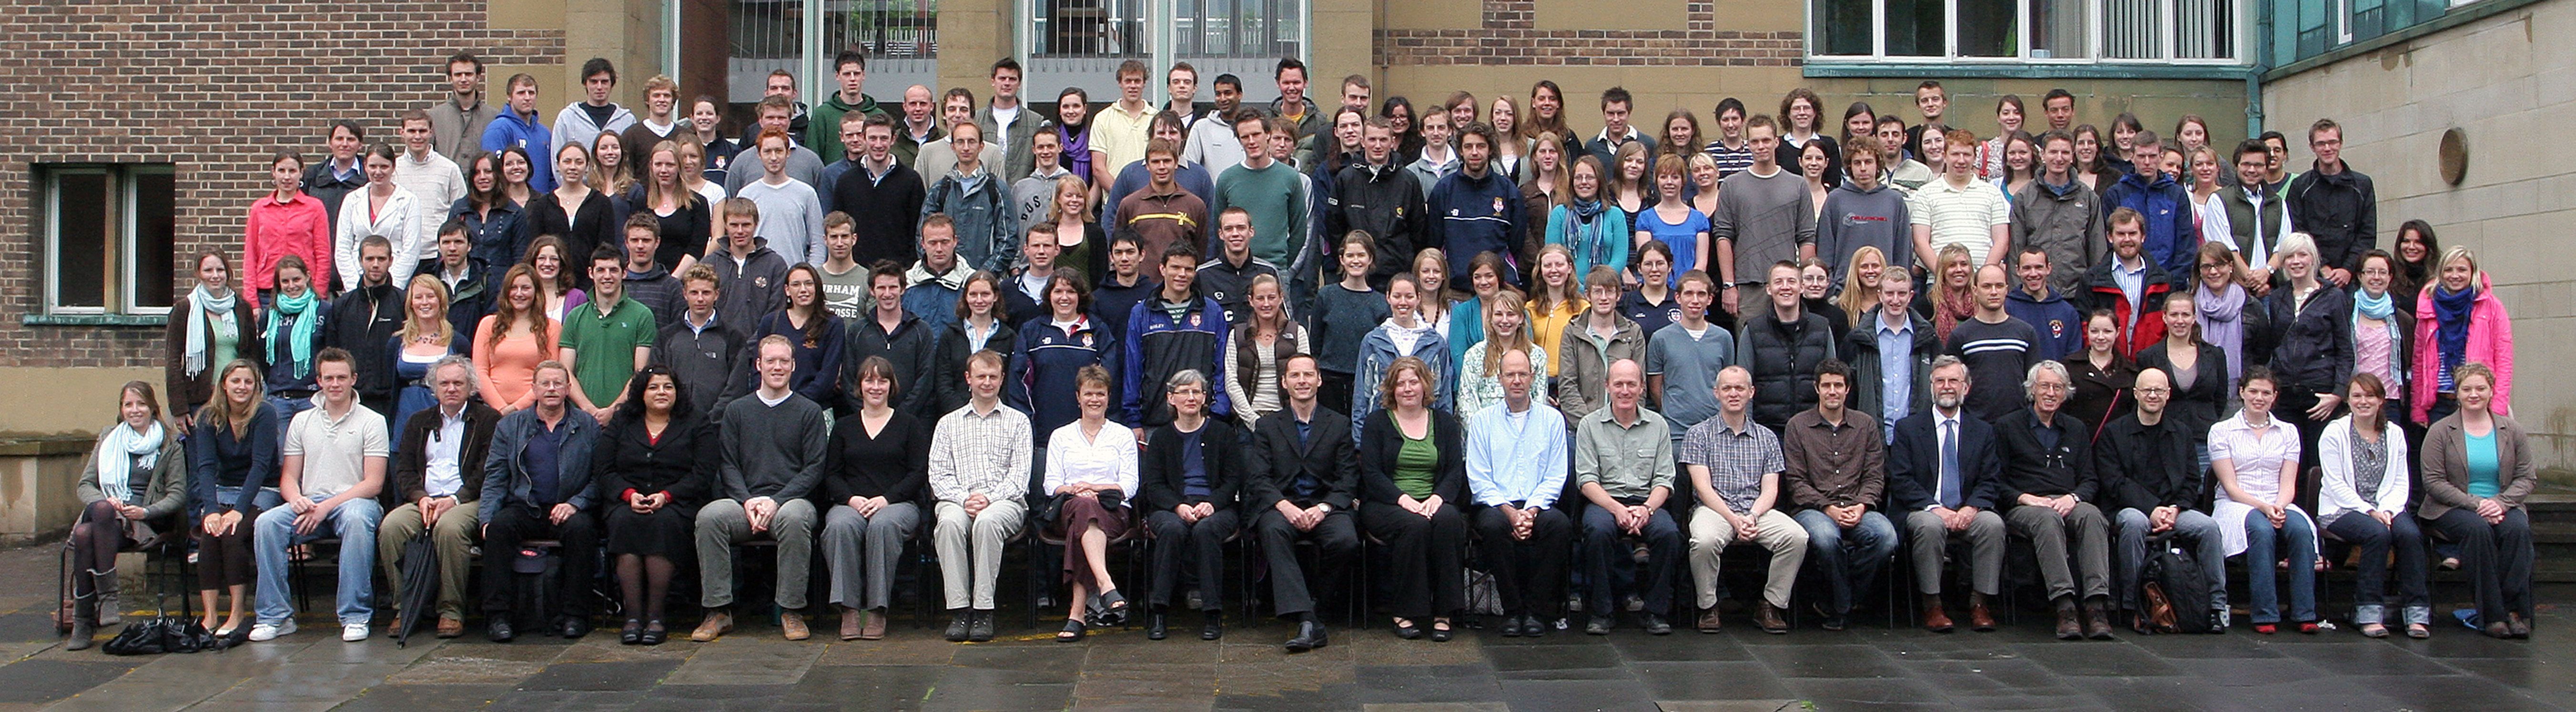 Geography Department Undergraduate Group photo from 2007